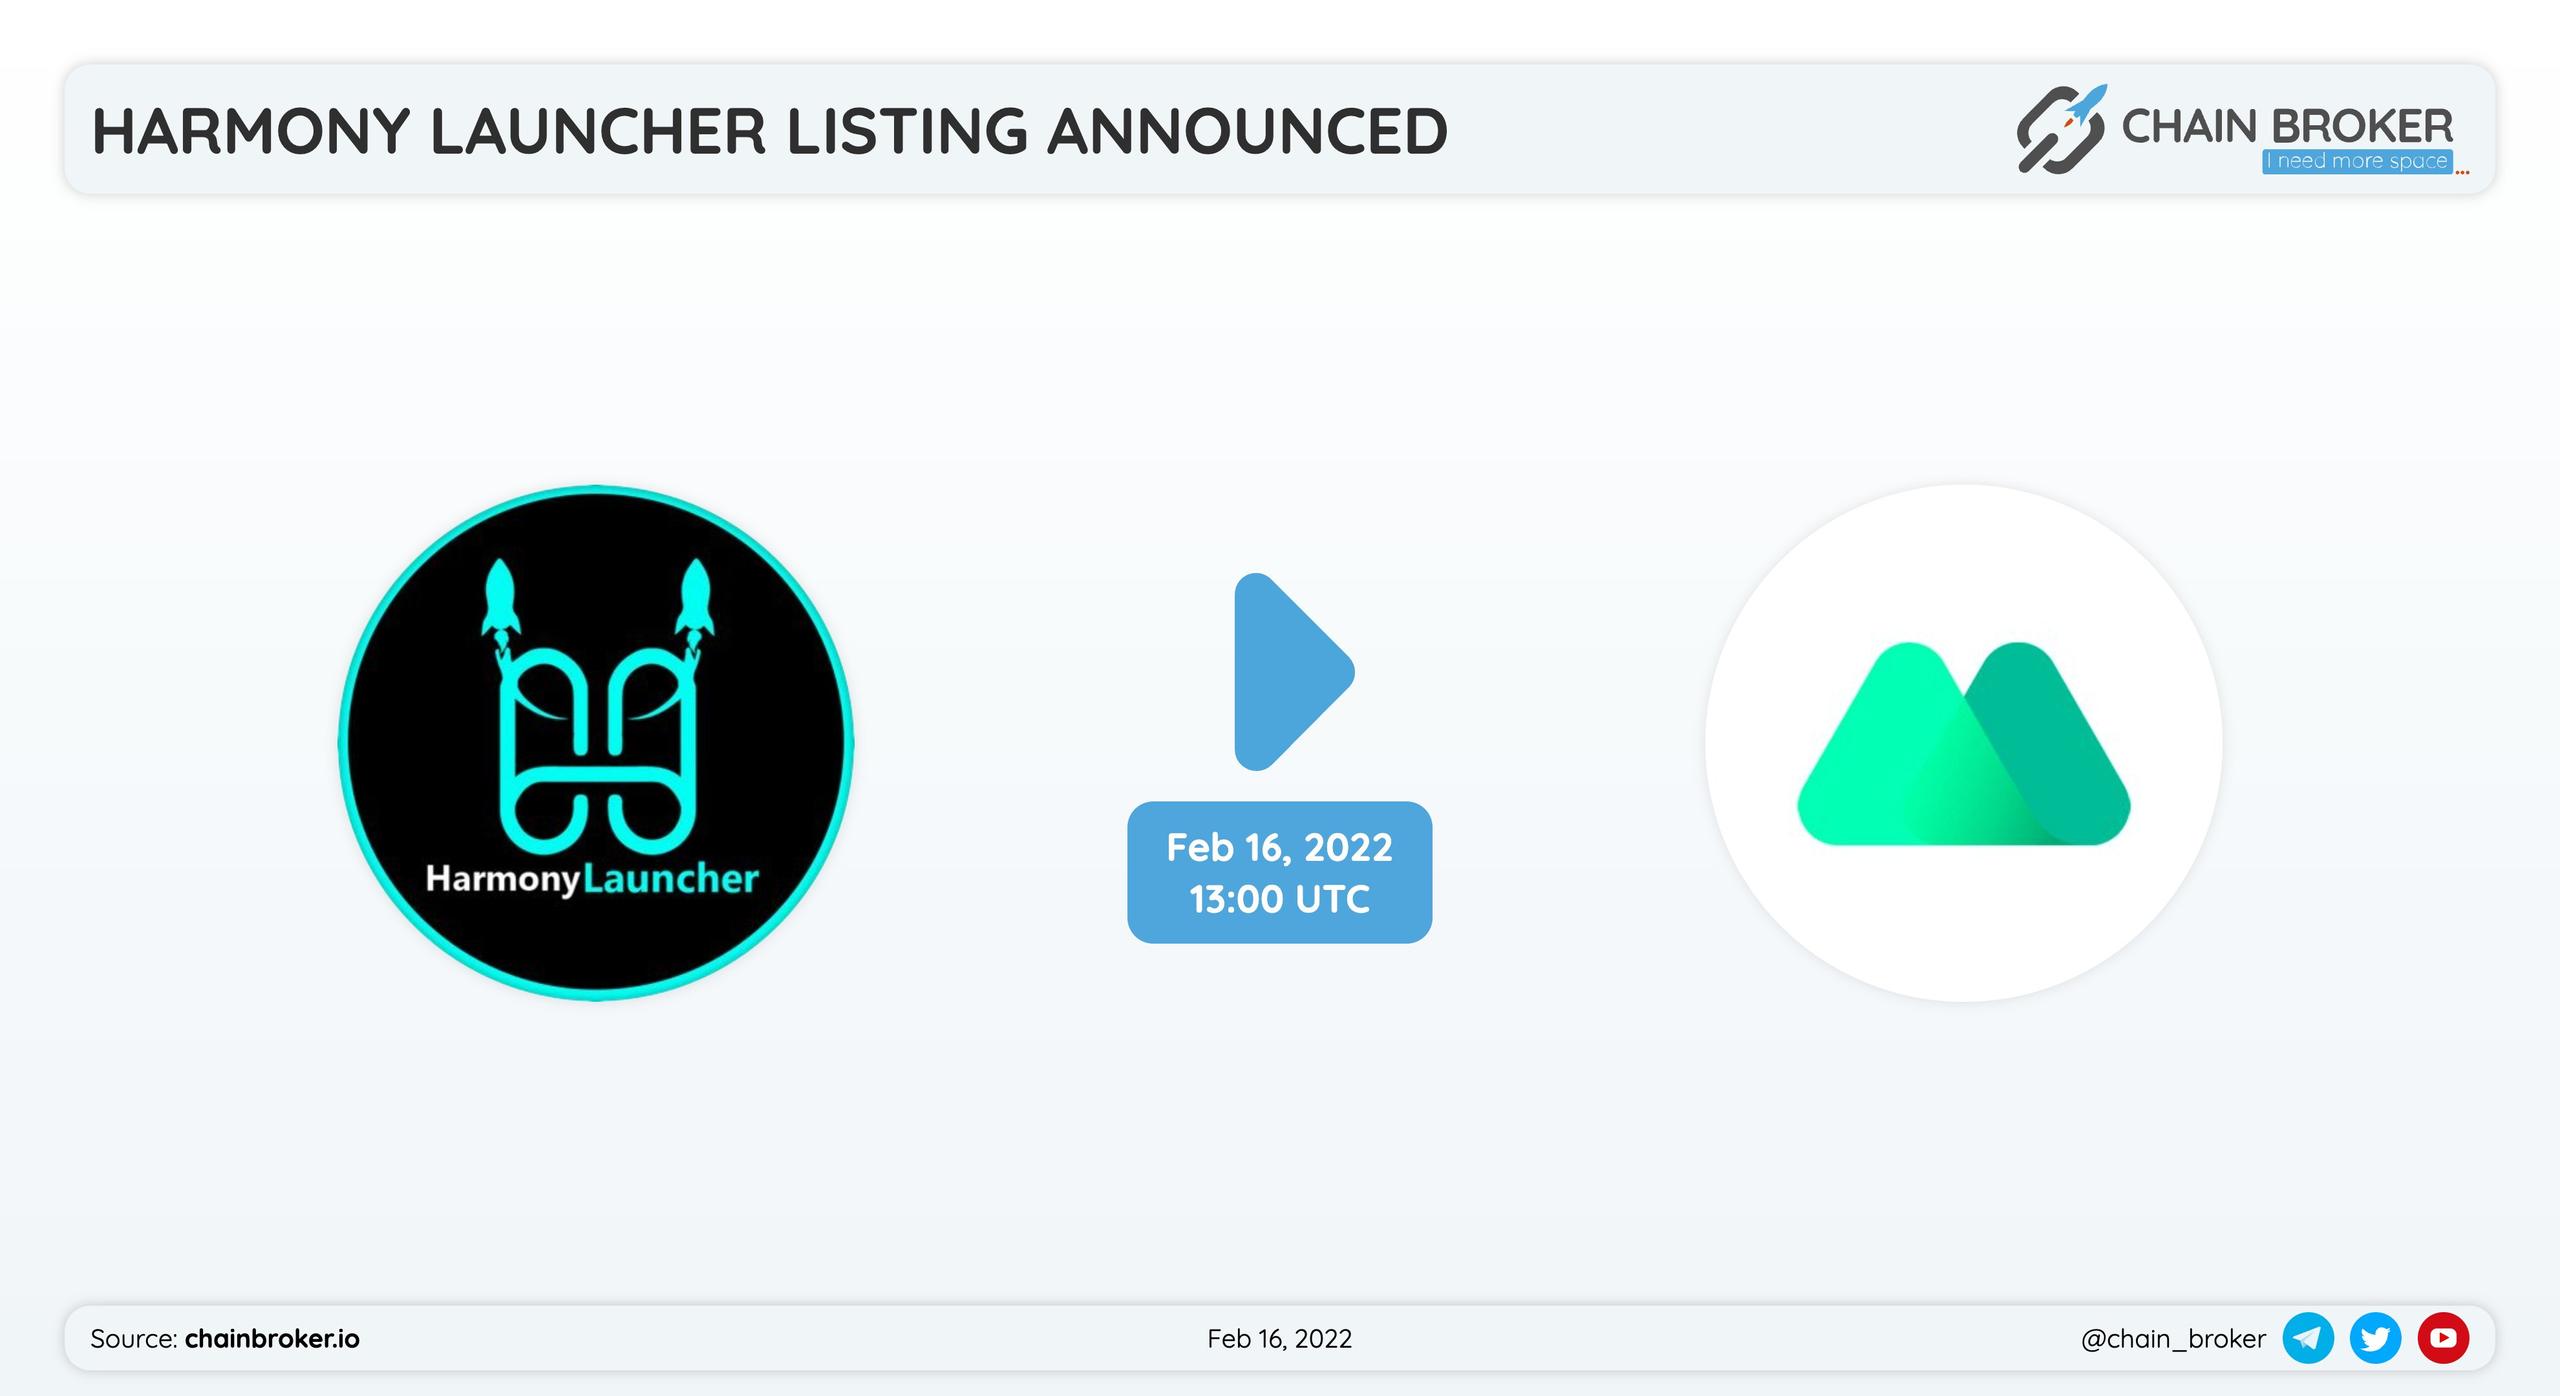 Harmony Launcher has partnered with MEXC for a token listing.